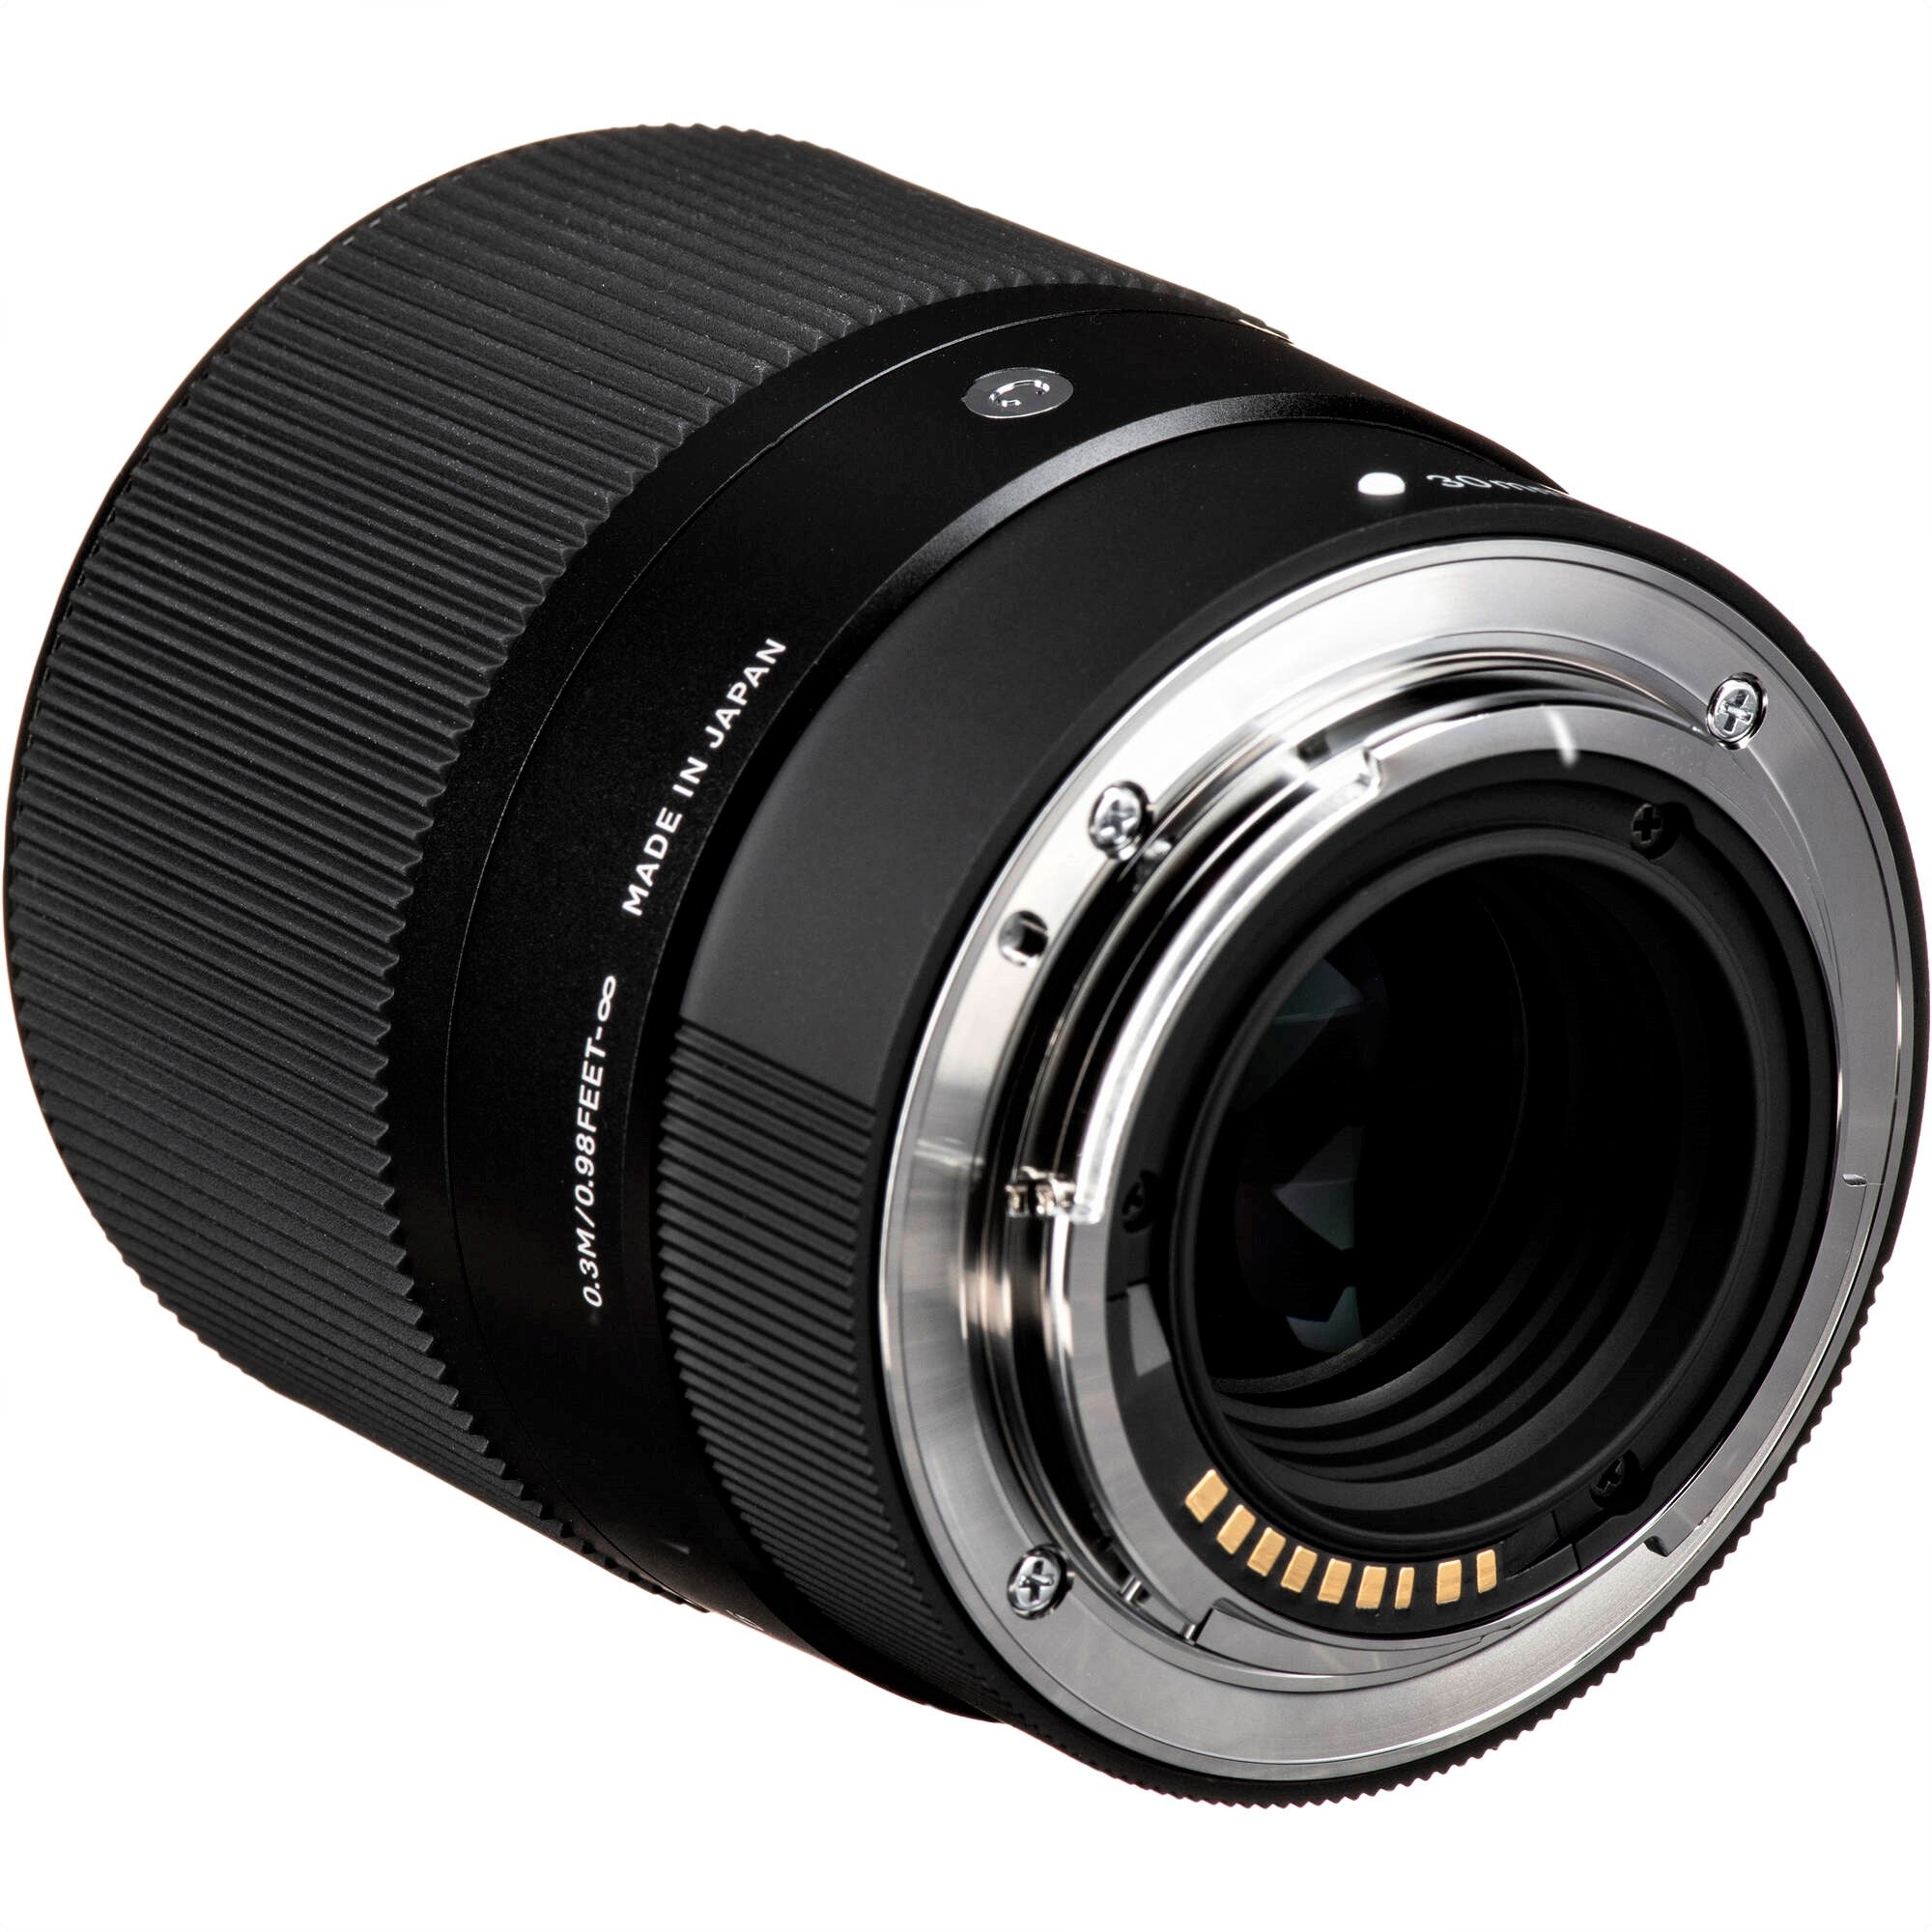 Sigma 30mm F1.4 DC DN Contemporary for Sony E-mount lens review